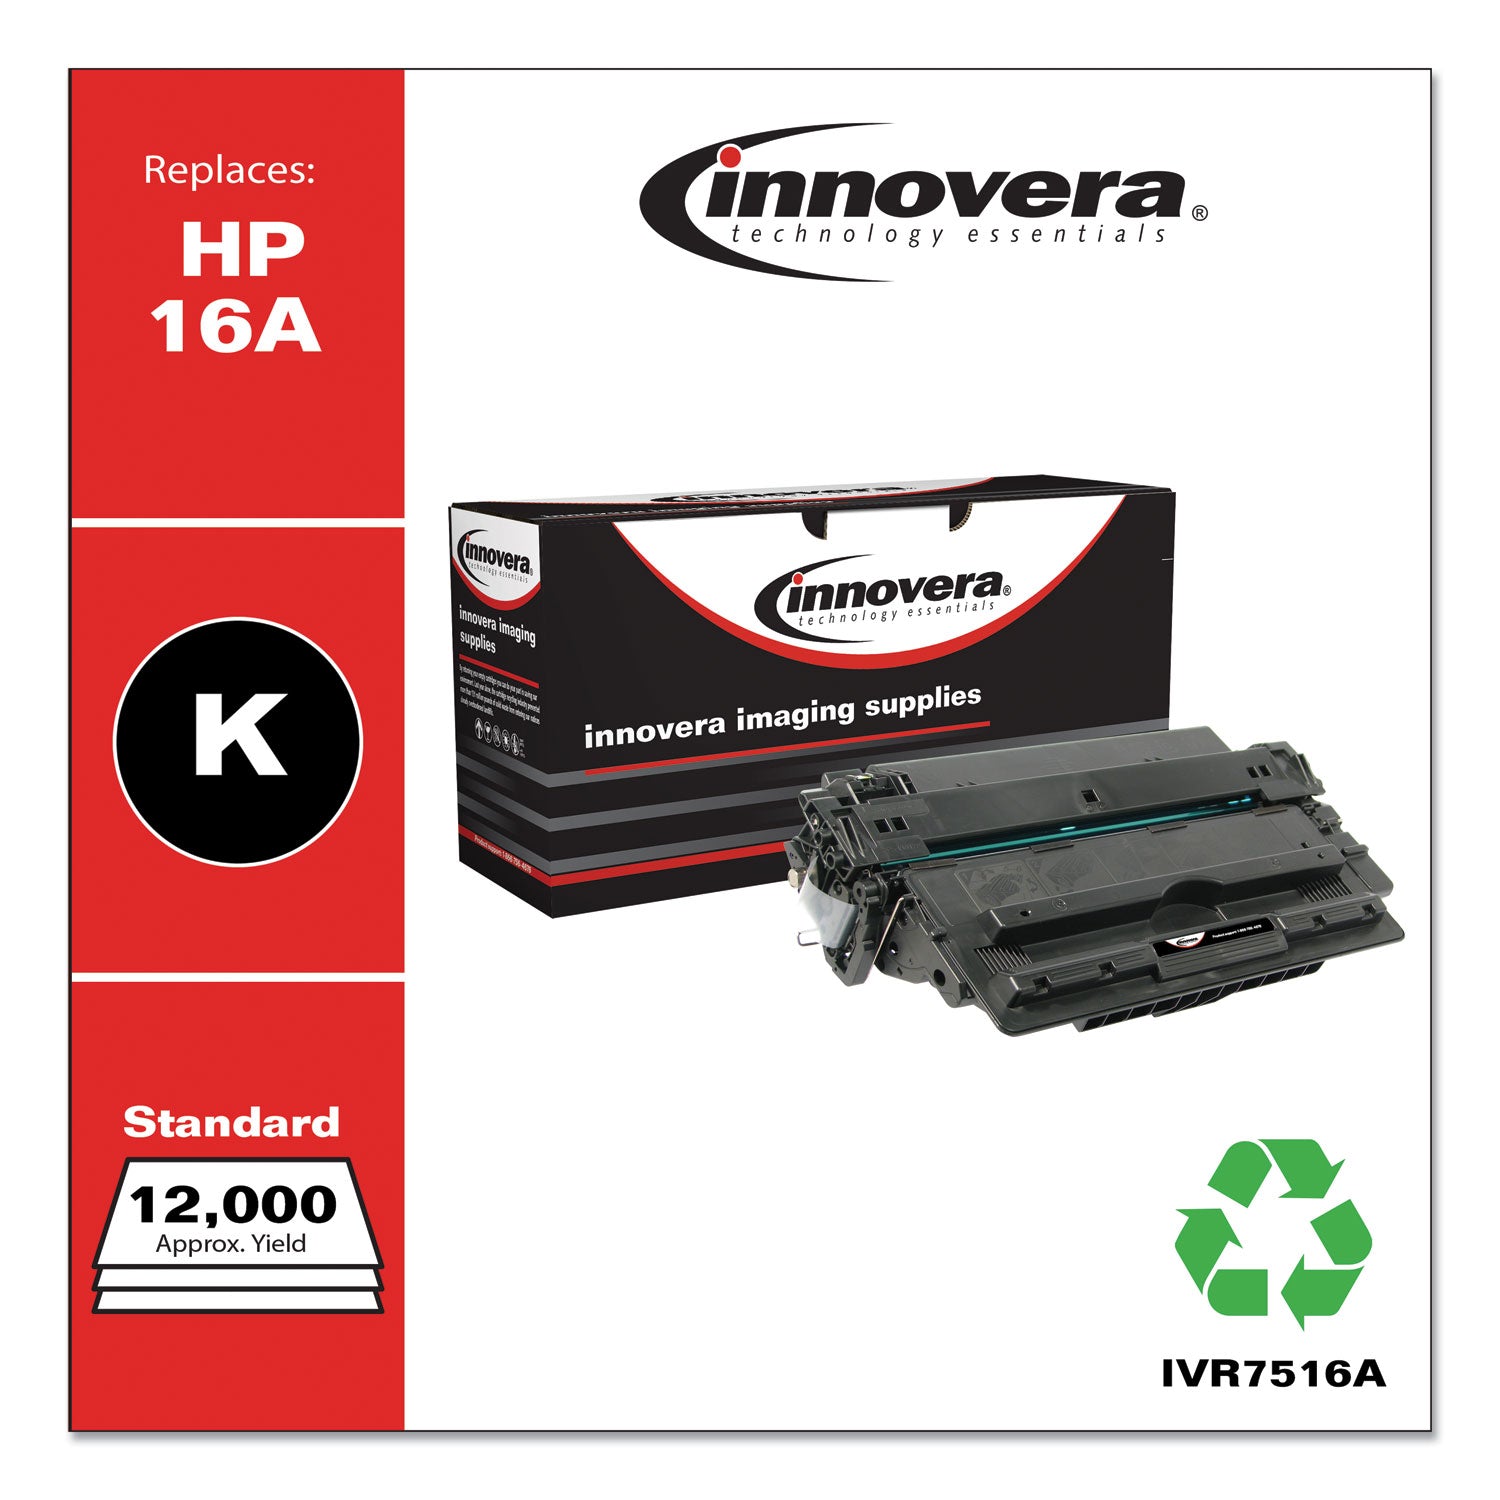 Remanufactured Black Toner, Replacement for 16A (Q7516A), 12,000 Page-Yield, Ships in 1-3 Business Days - 